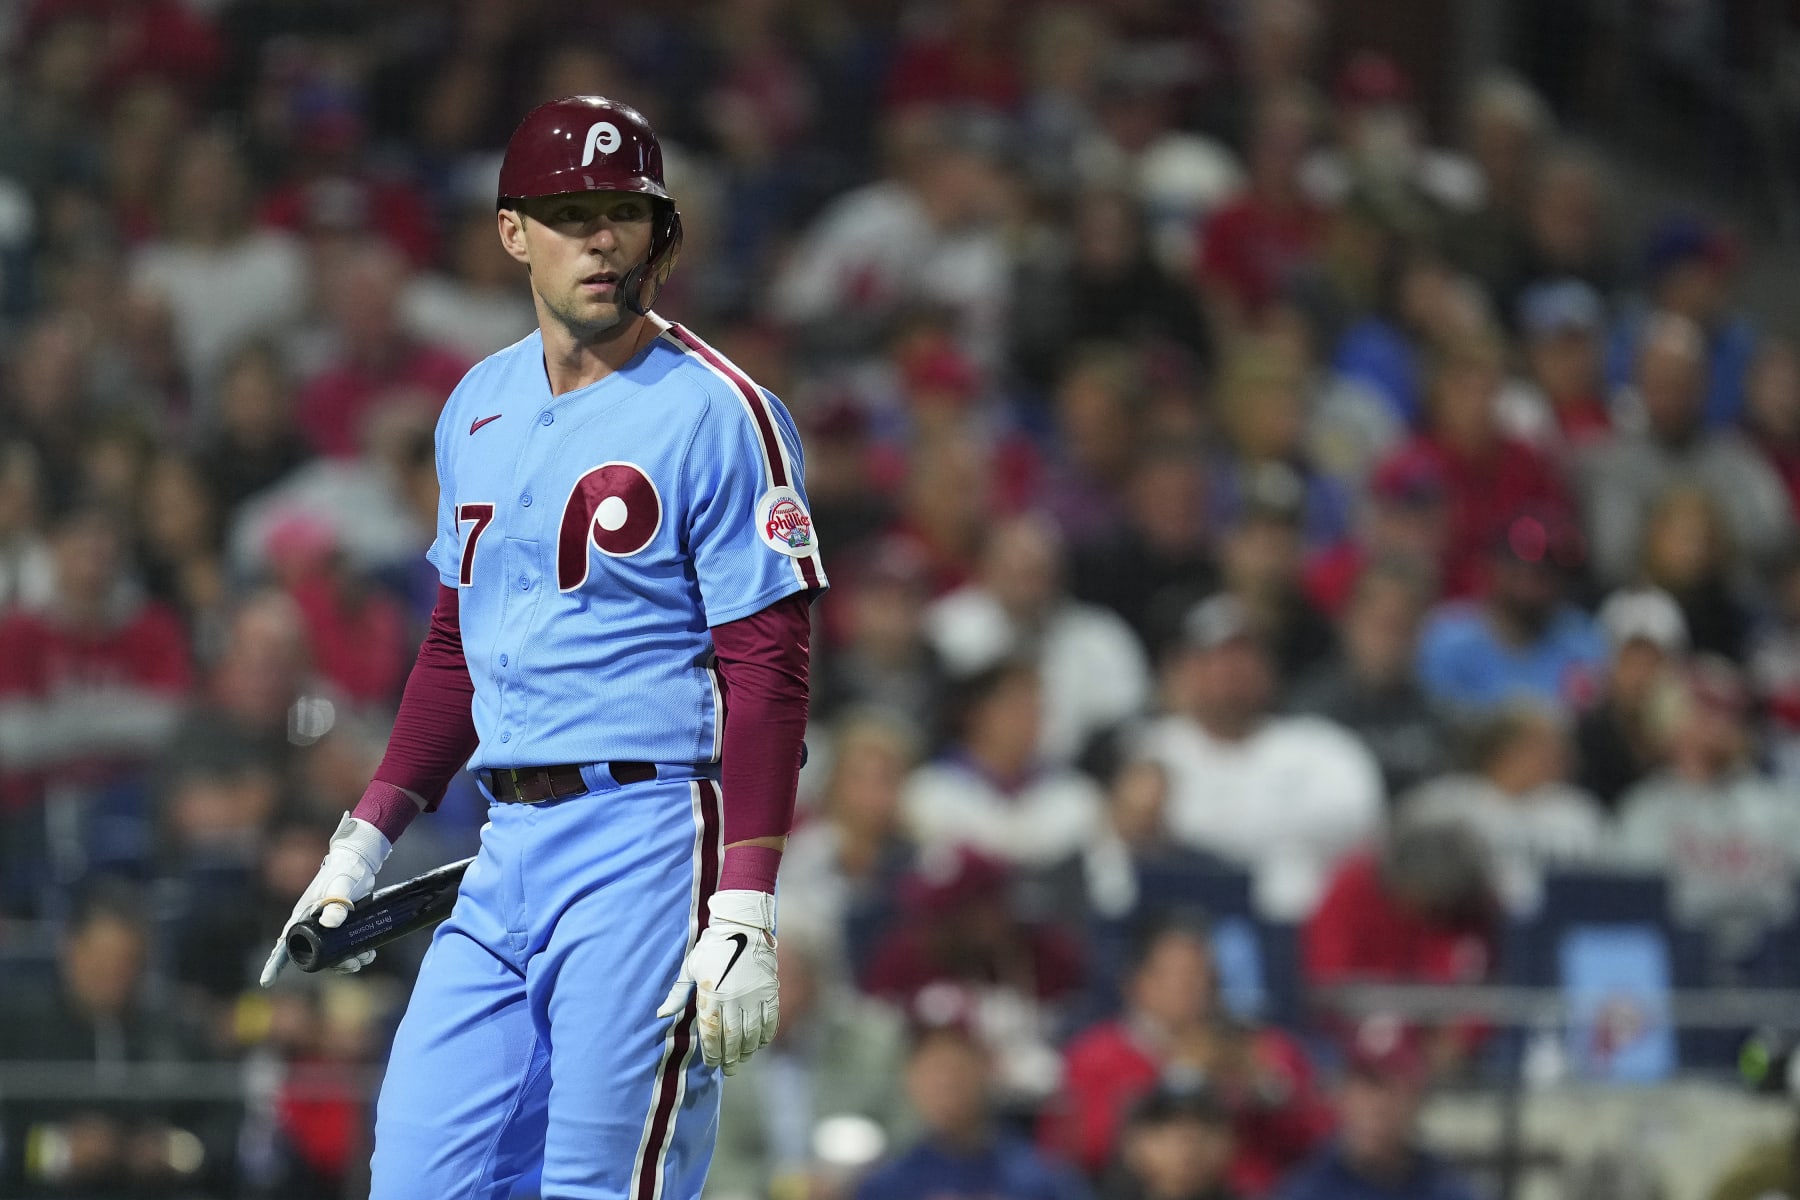 Phillies unveil Player's Weekend jerseys, nicknames ahead of